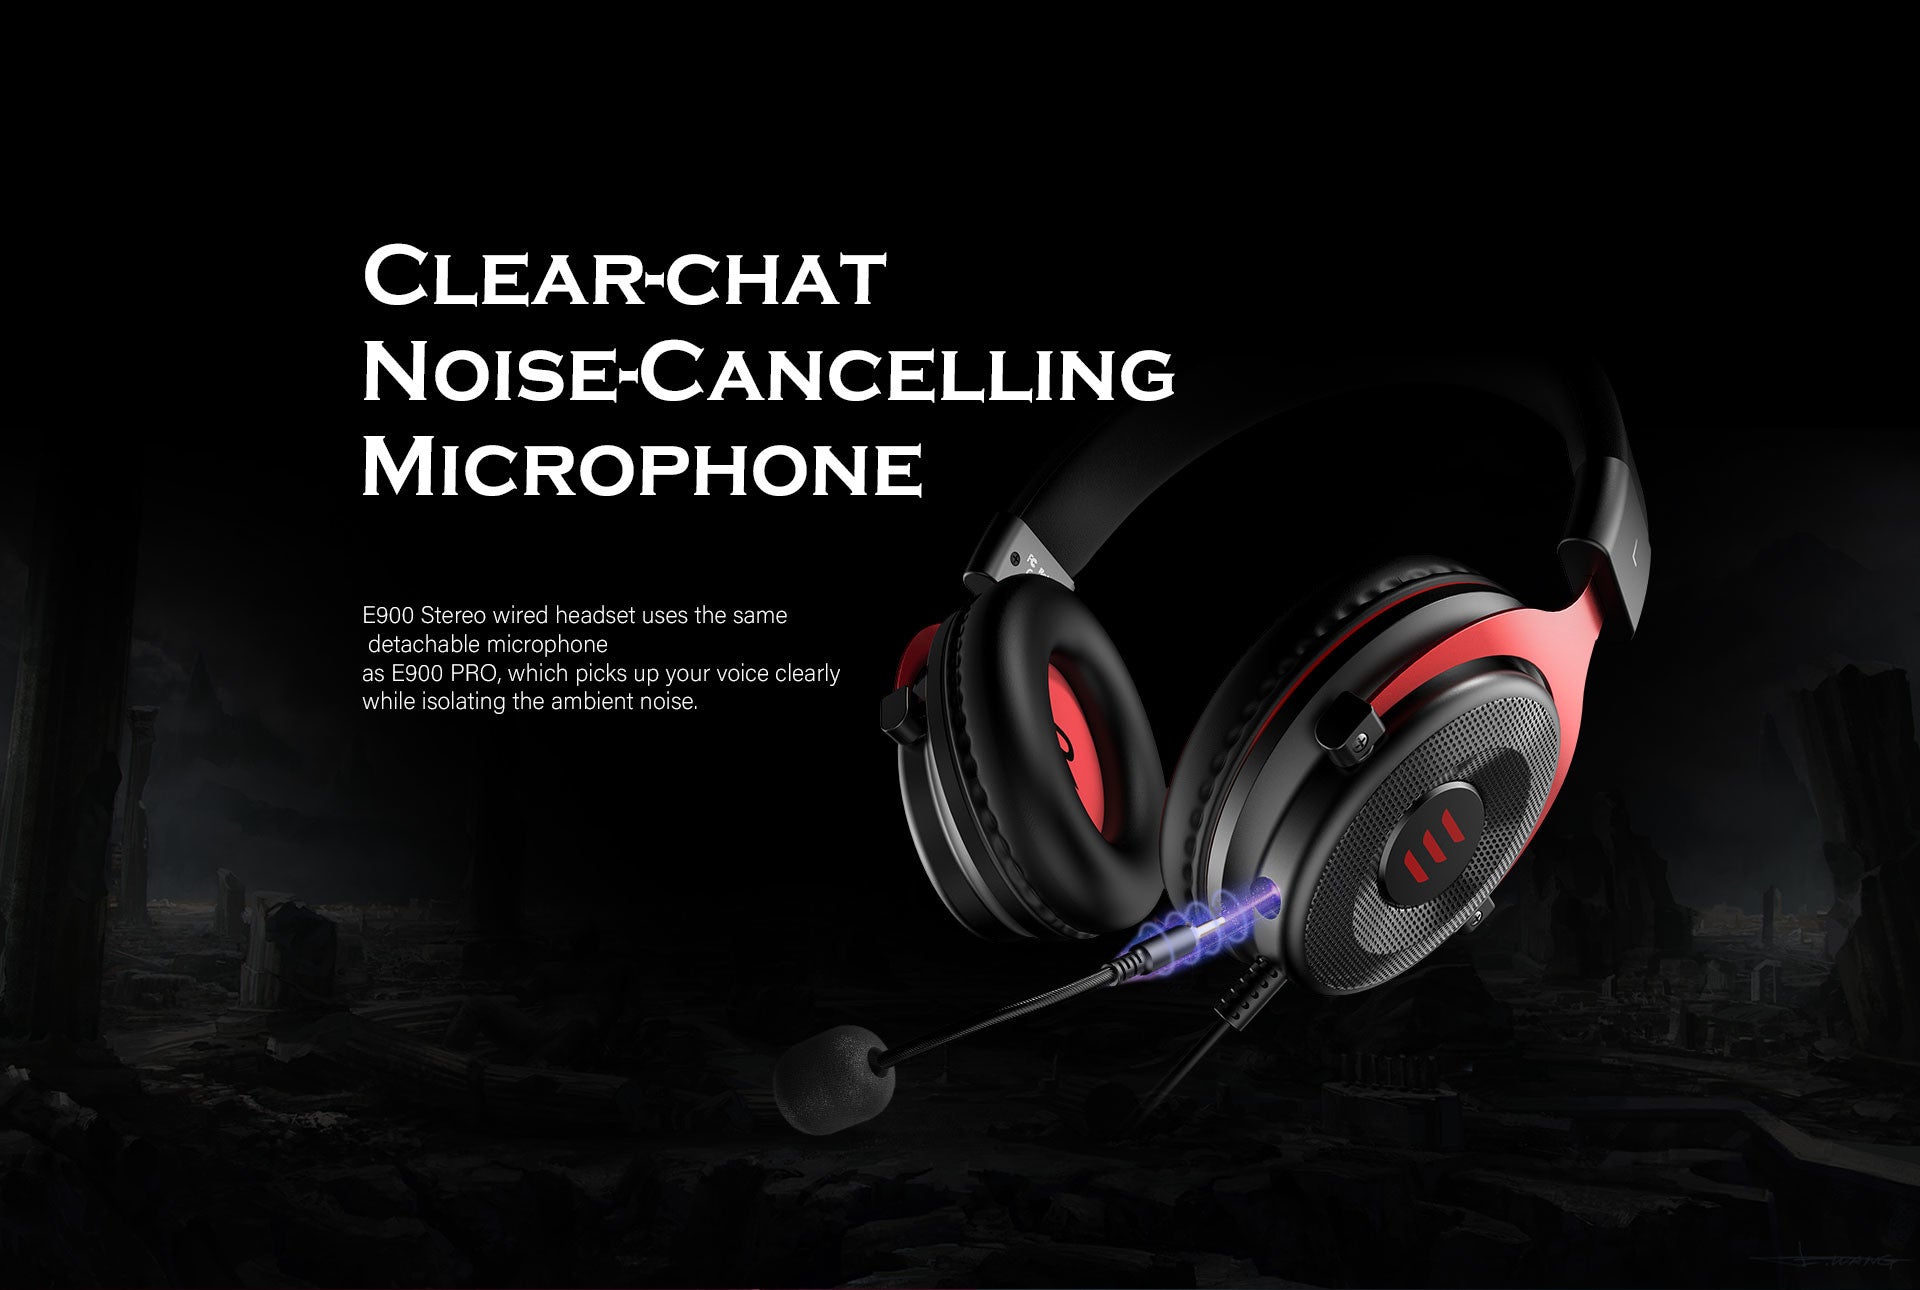 Clear-chat Noise-Cancelling Microphone